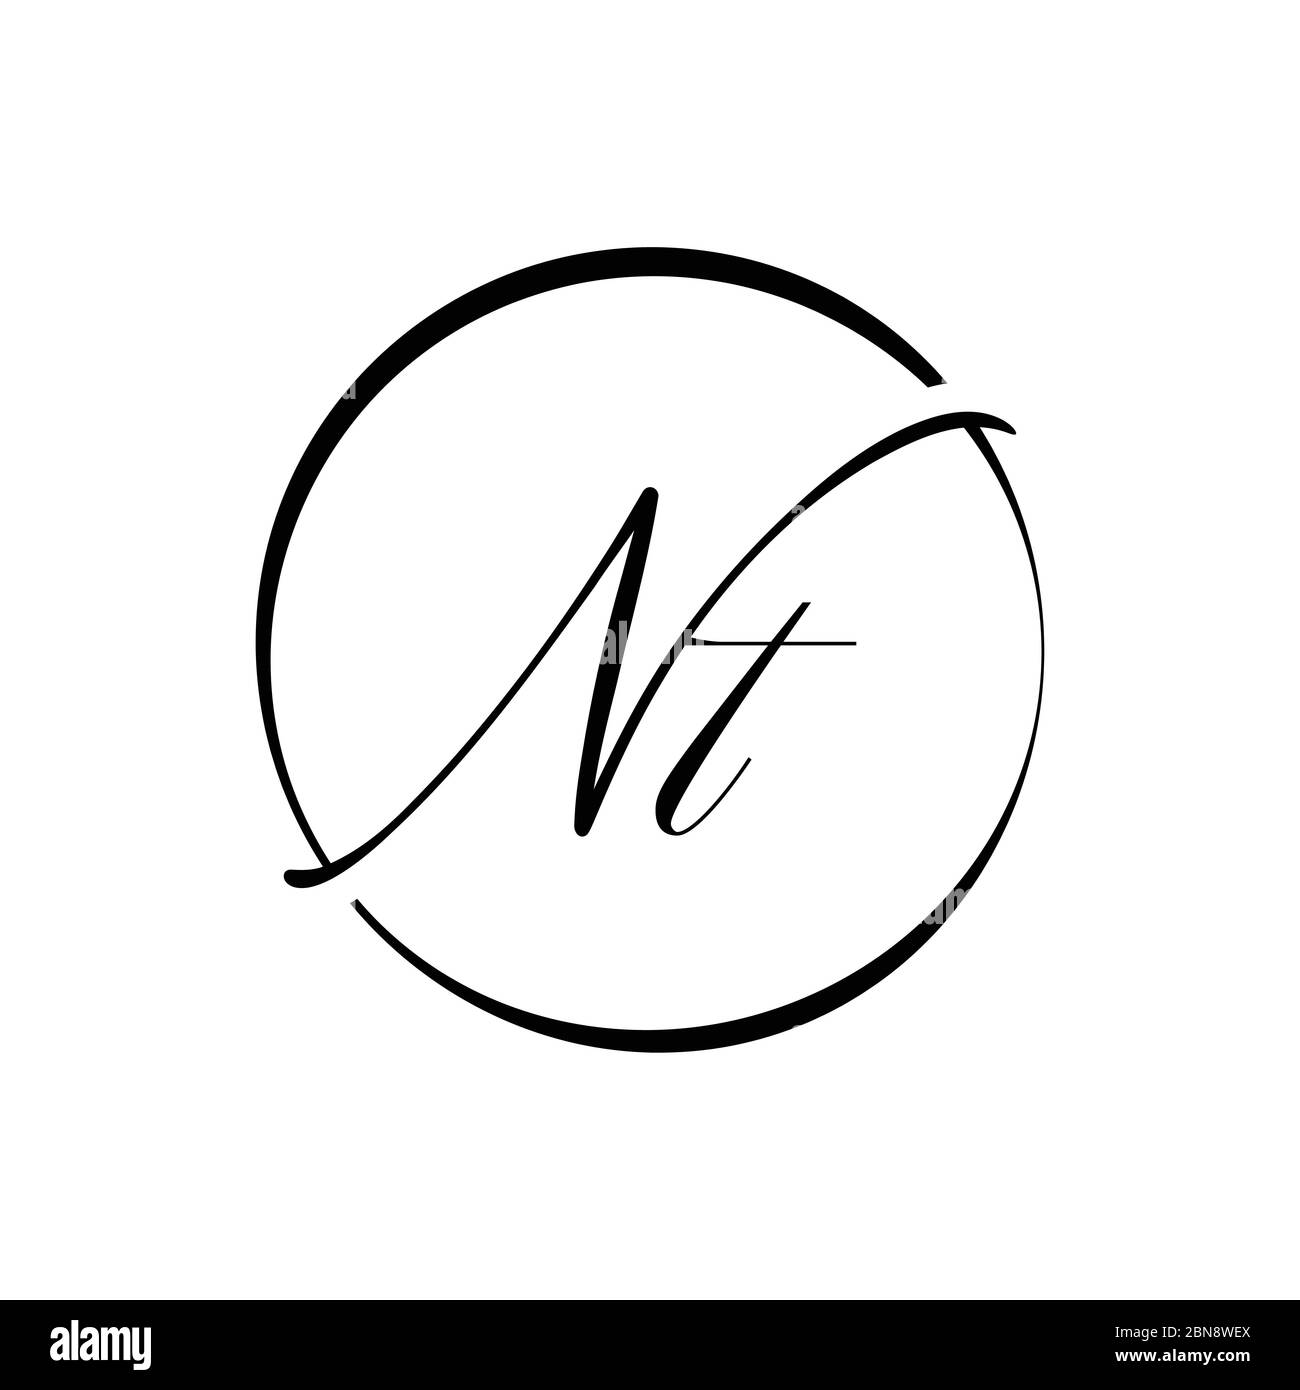 Initial Letter NT Logo Design Vector Template. Creative Abstract ...